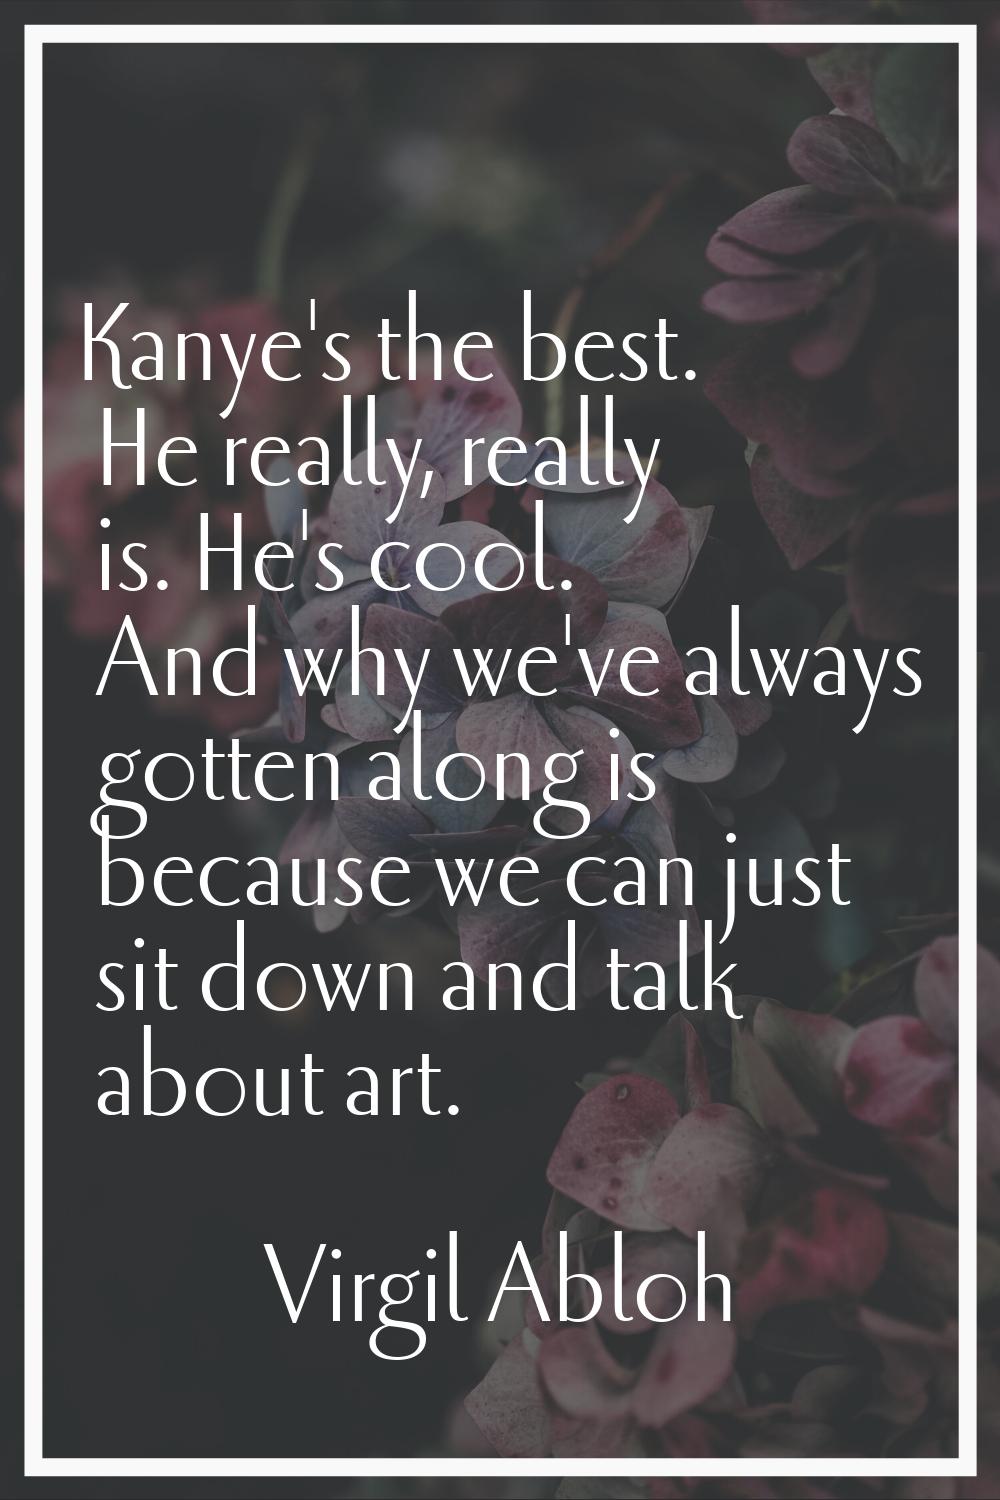 Kanye's the best. He really, really is. He's cool. And why we've always gotten along is because we 